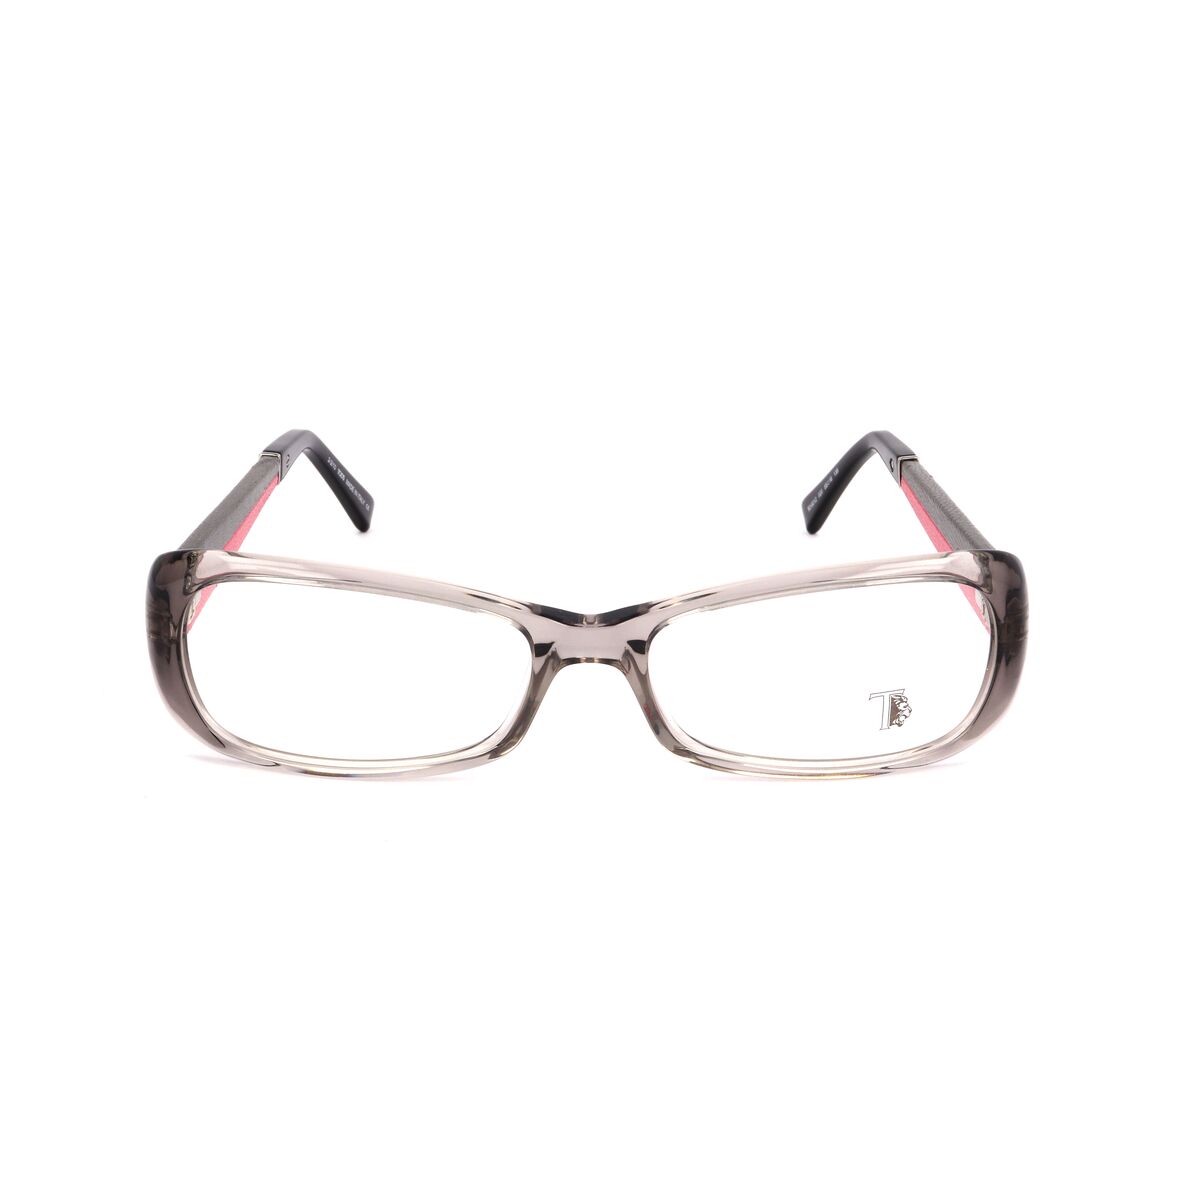 Ladies'Spectacle frame Tods TO5012-020-55 Grey